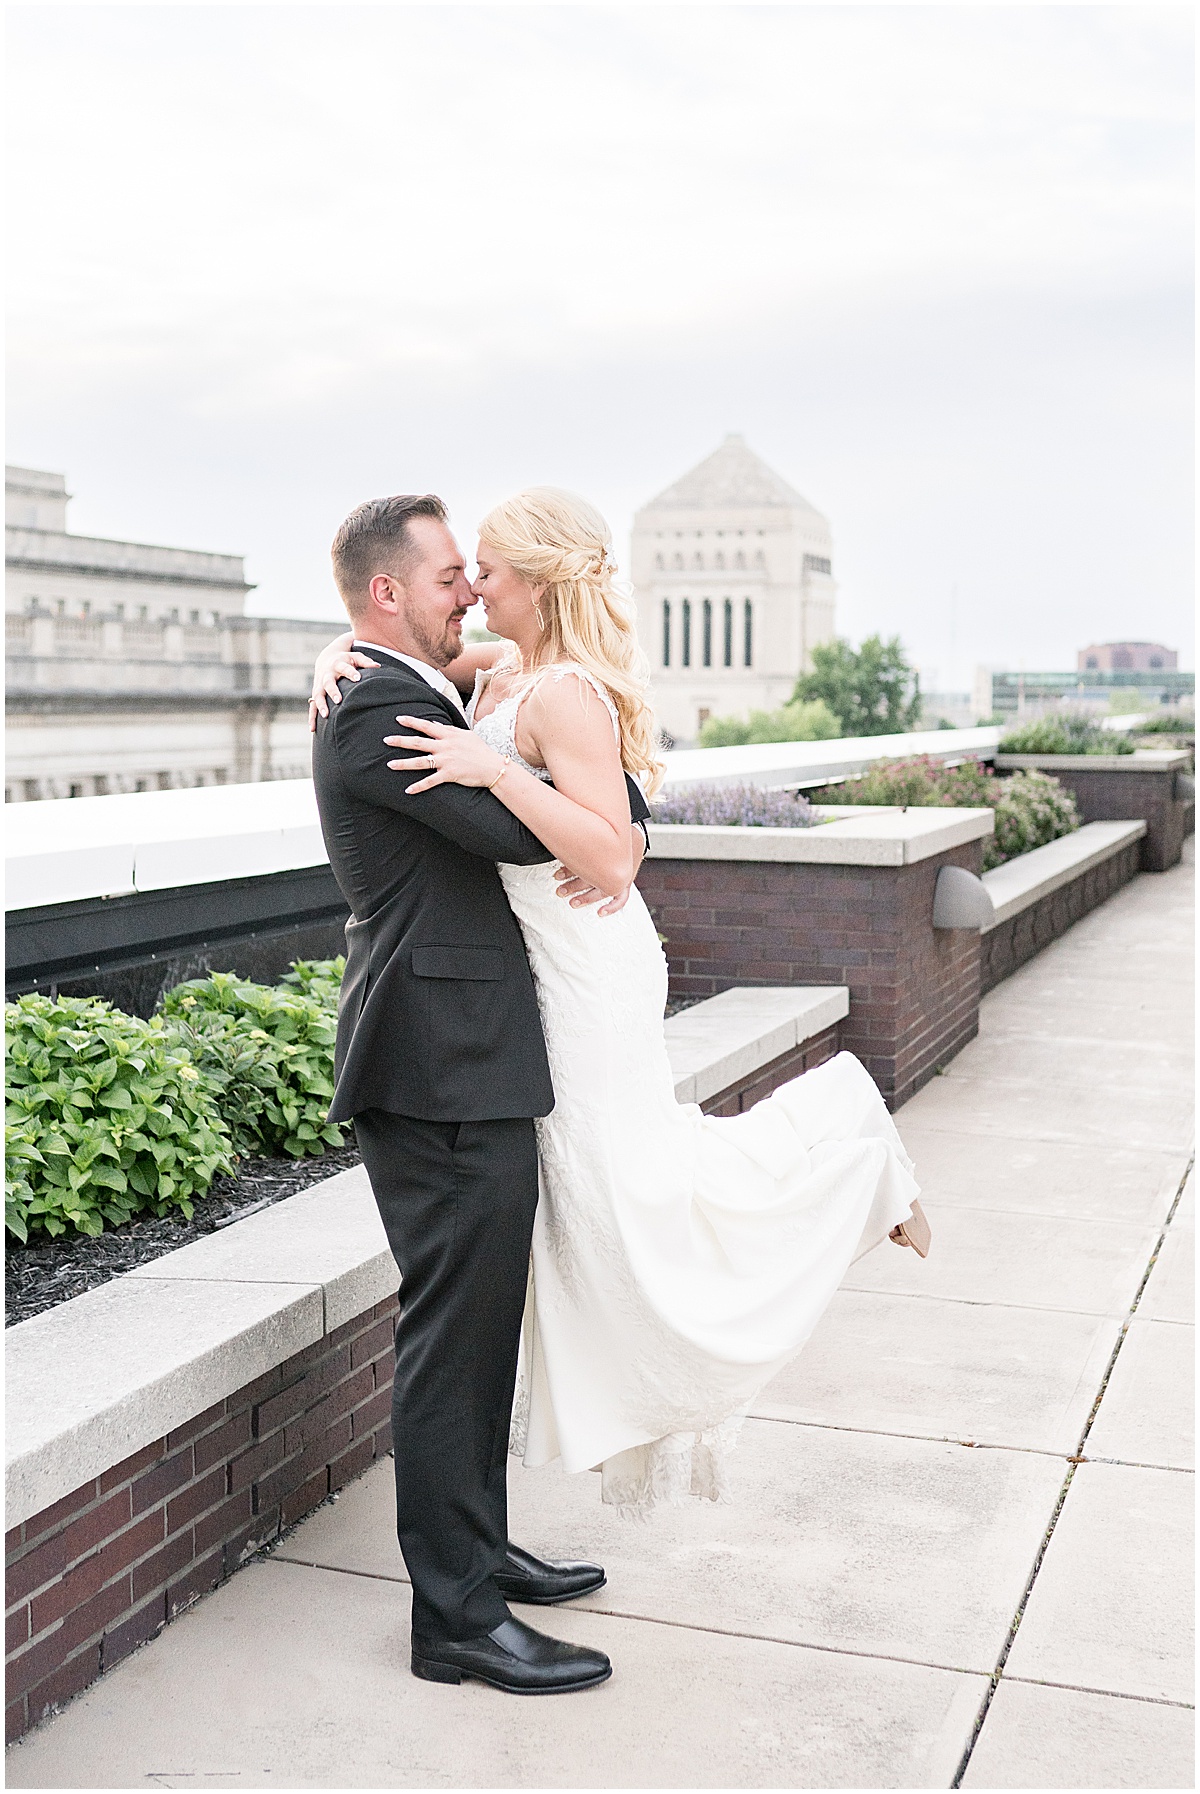 Nile & Haylie: Engagement Photos in Downtown Lafayette, Indiana